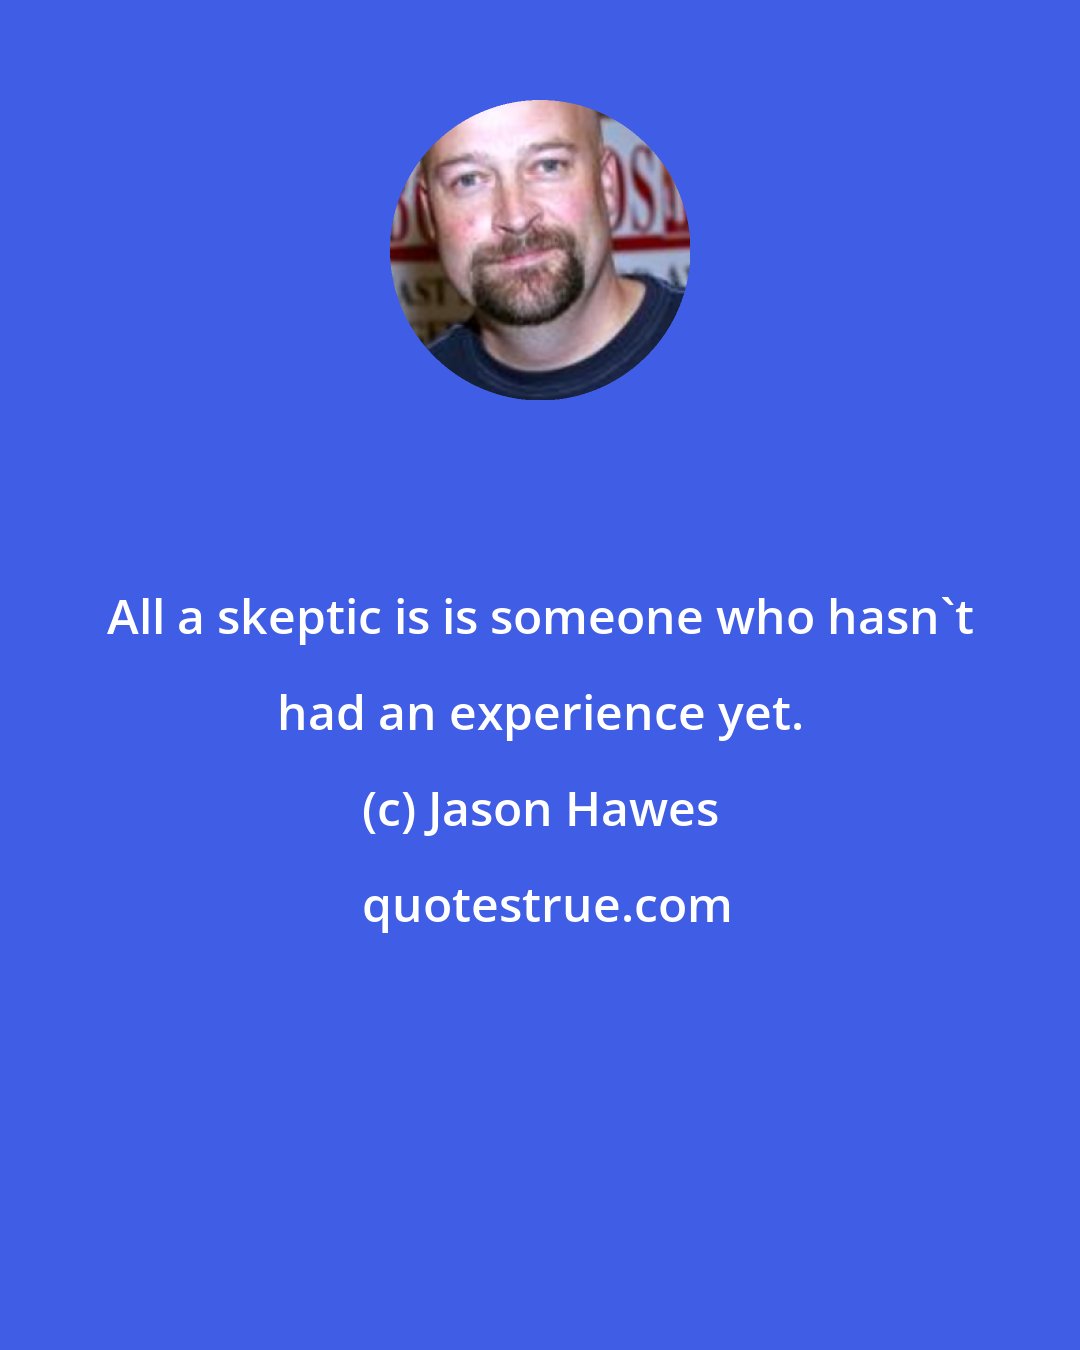 Jason Hawes: All a skeptic is is someone who hasn't had an experience yet.